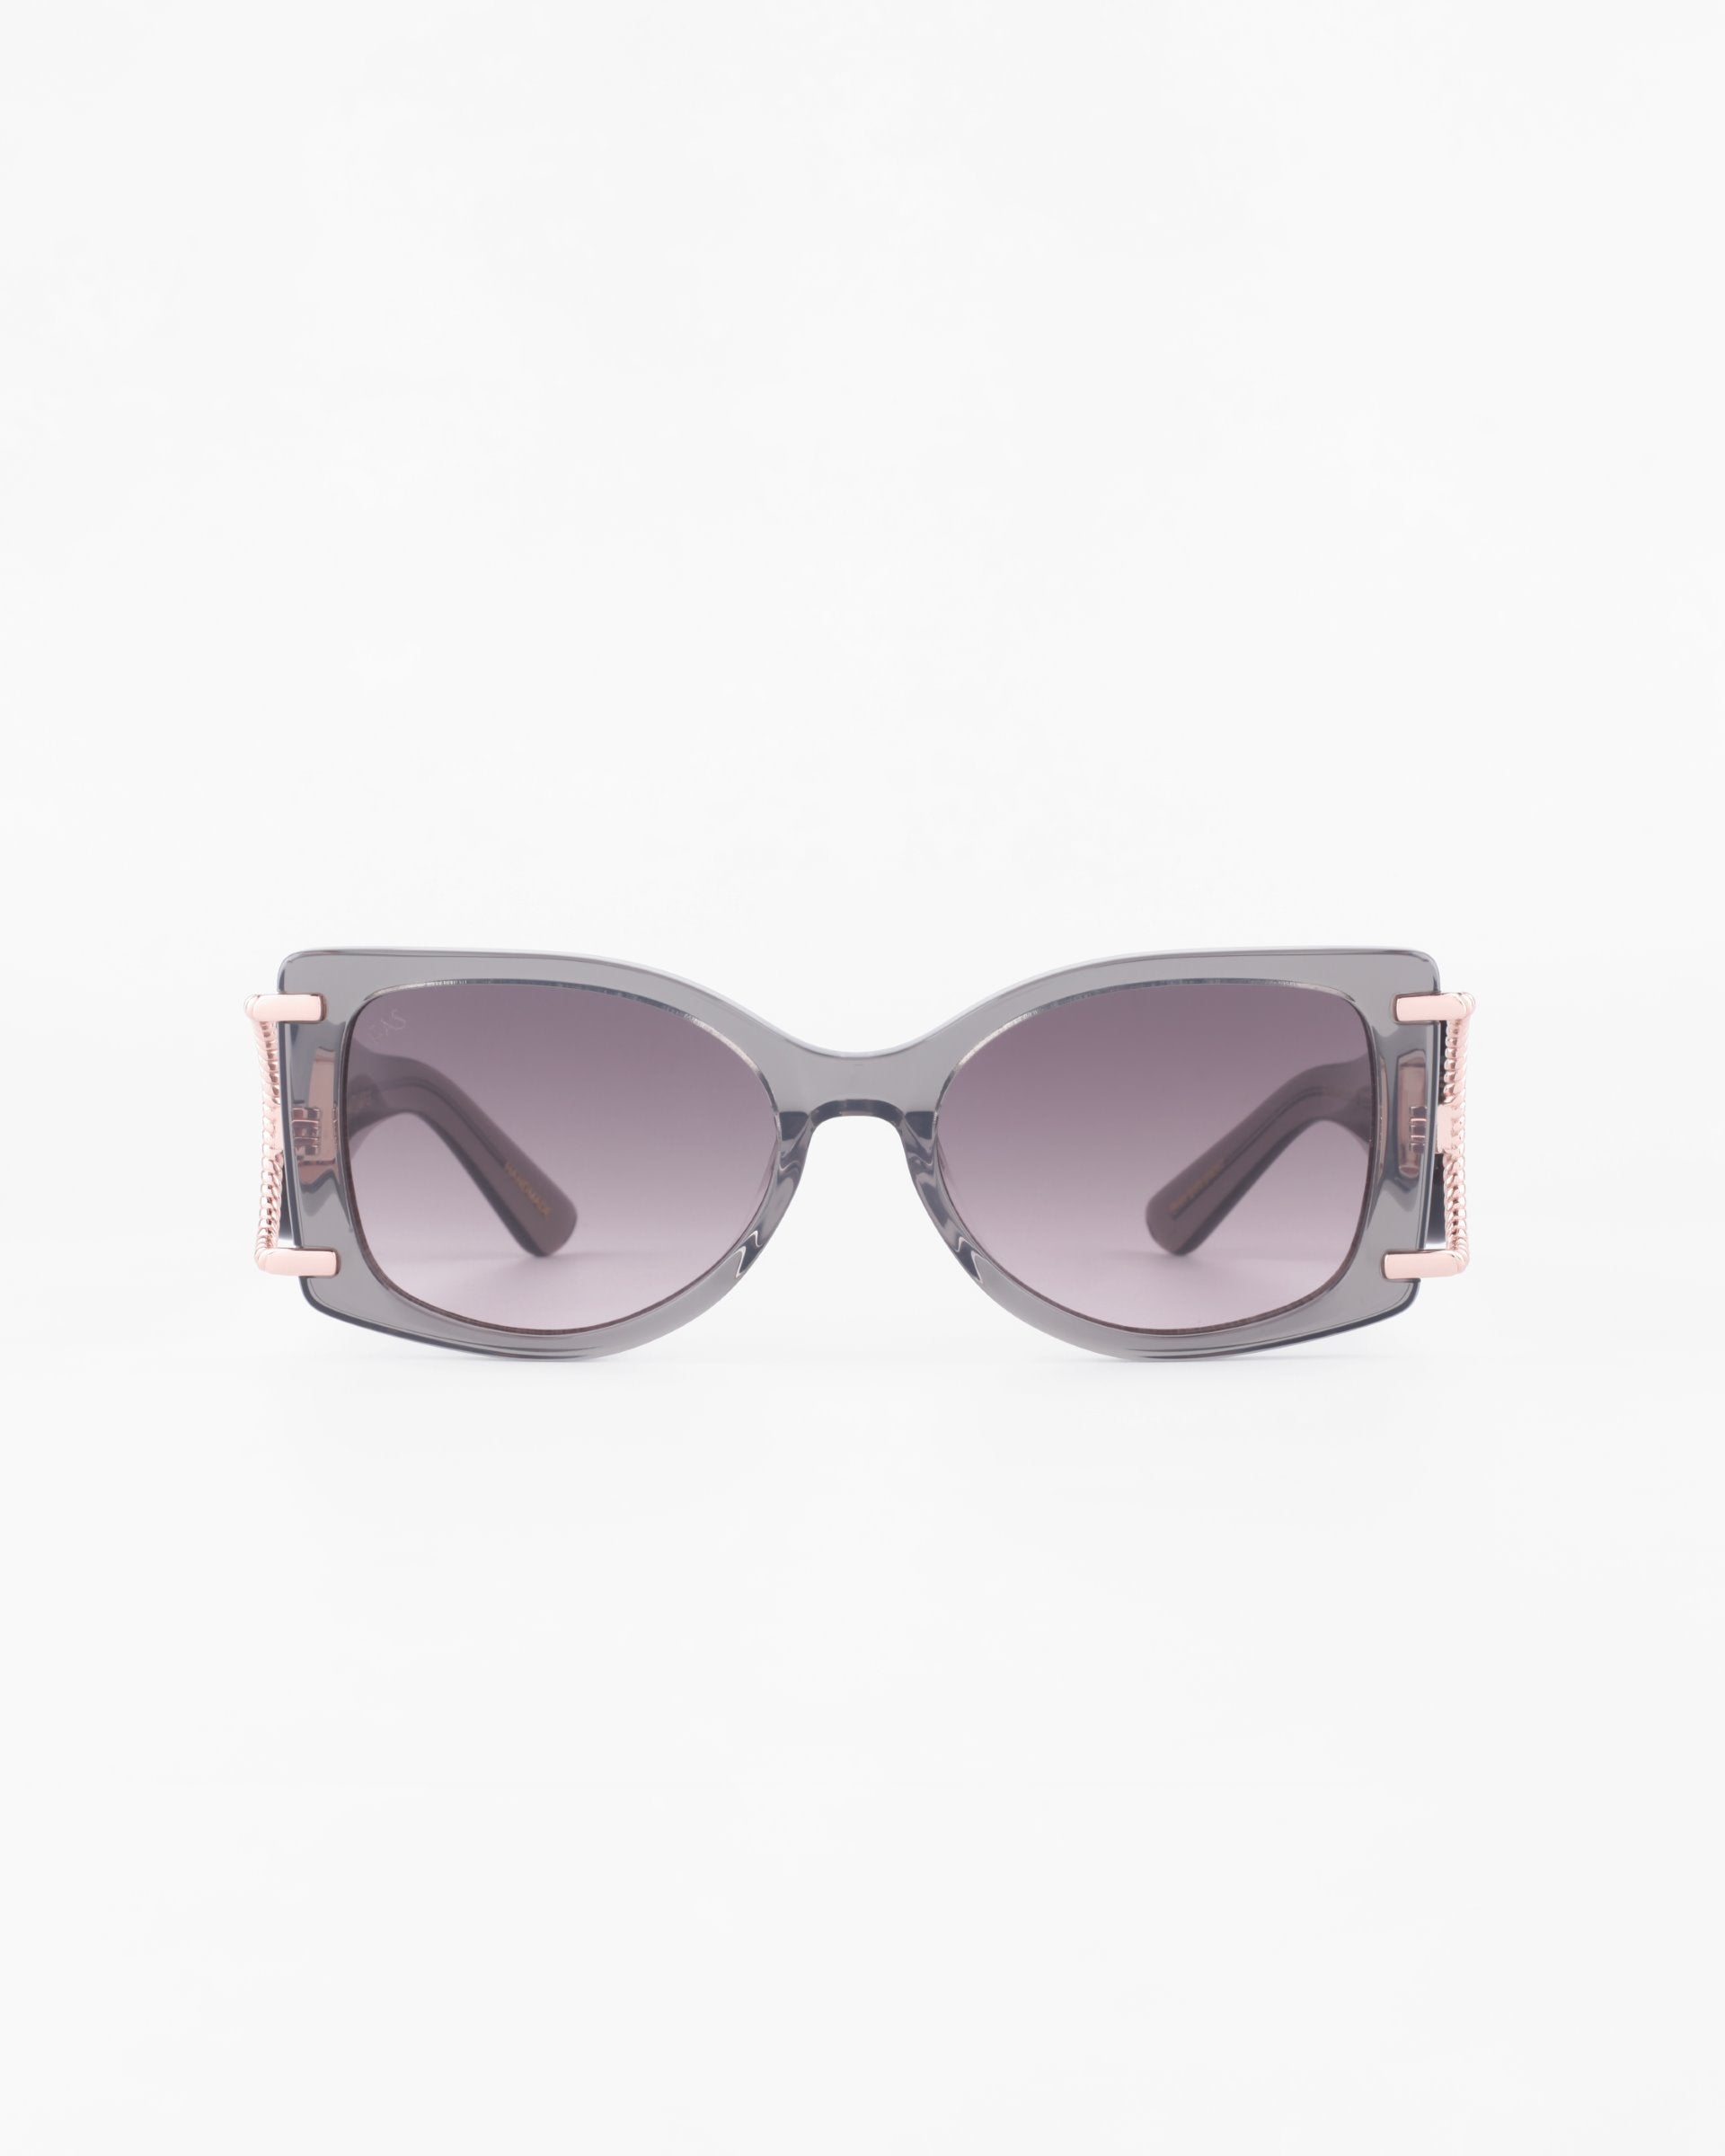 A pair of stylish, large, square-shaped acetate sunglasses with dark grey lenses and black frames. The sides of the frames feature an 18-karat gold-plated detail near the hinges, adding a touch of elegance to the design. These For Art&#39;s Sake® Sculpture sunglasses offer 100% UVA &amp; UVB protection and are set against a plain white background.